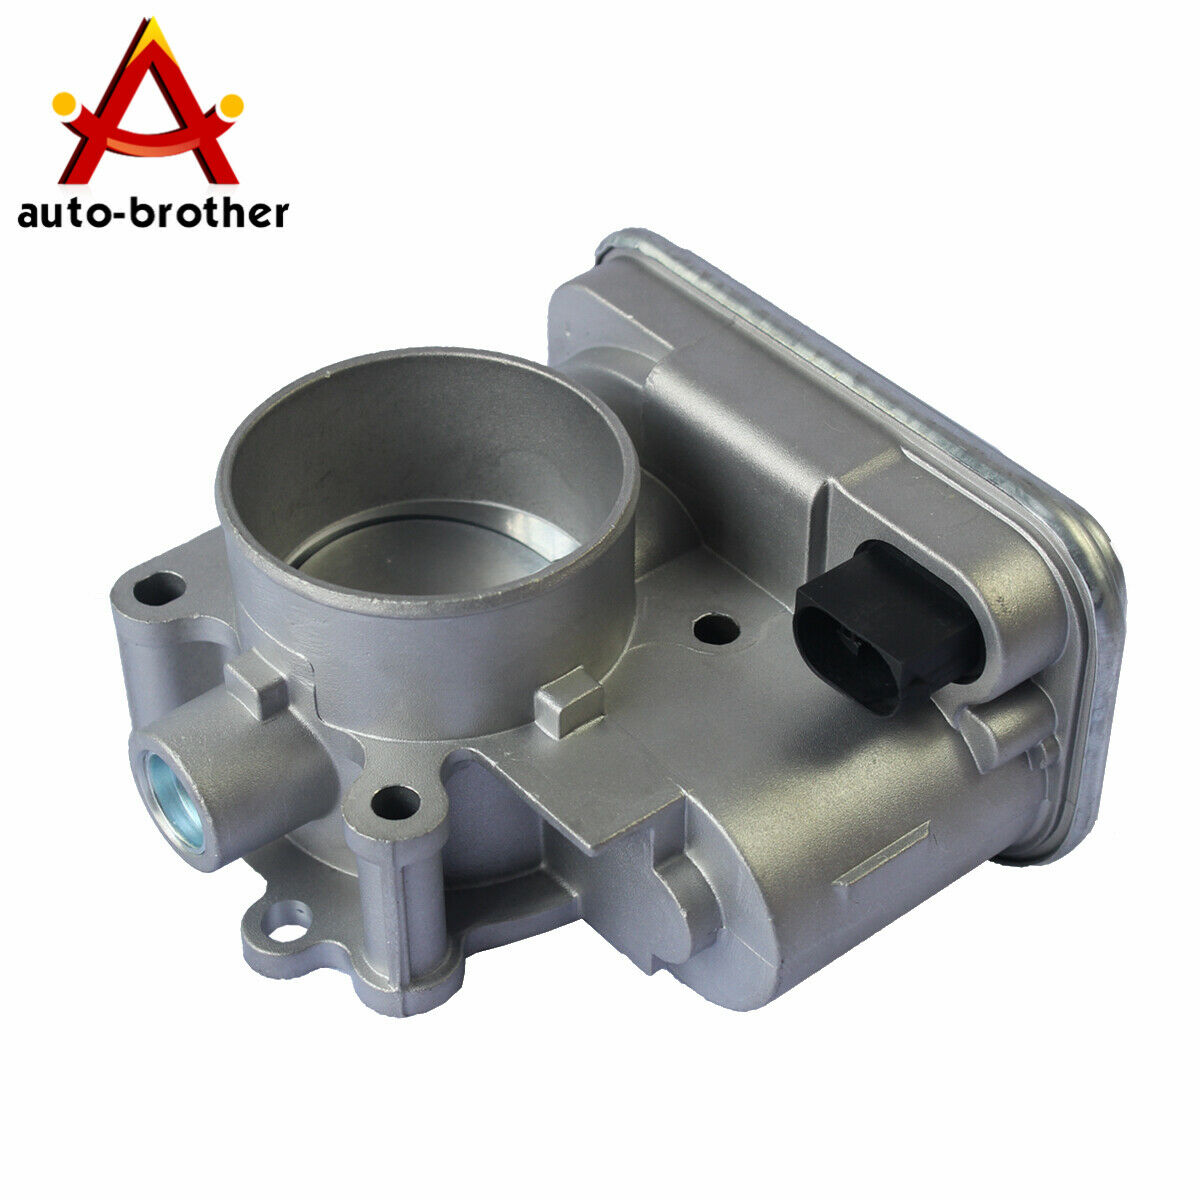 Throttle Body 04891735ac For Chrysler Jeep Dodge 200 1.8l 2.0l Compass Caliber